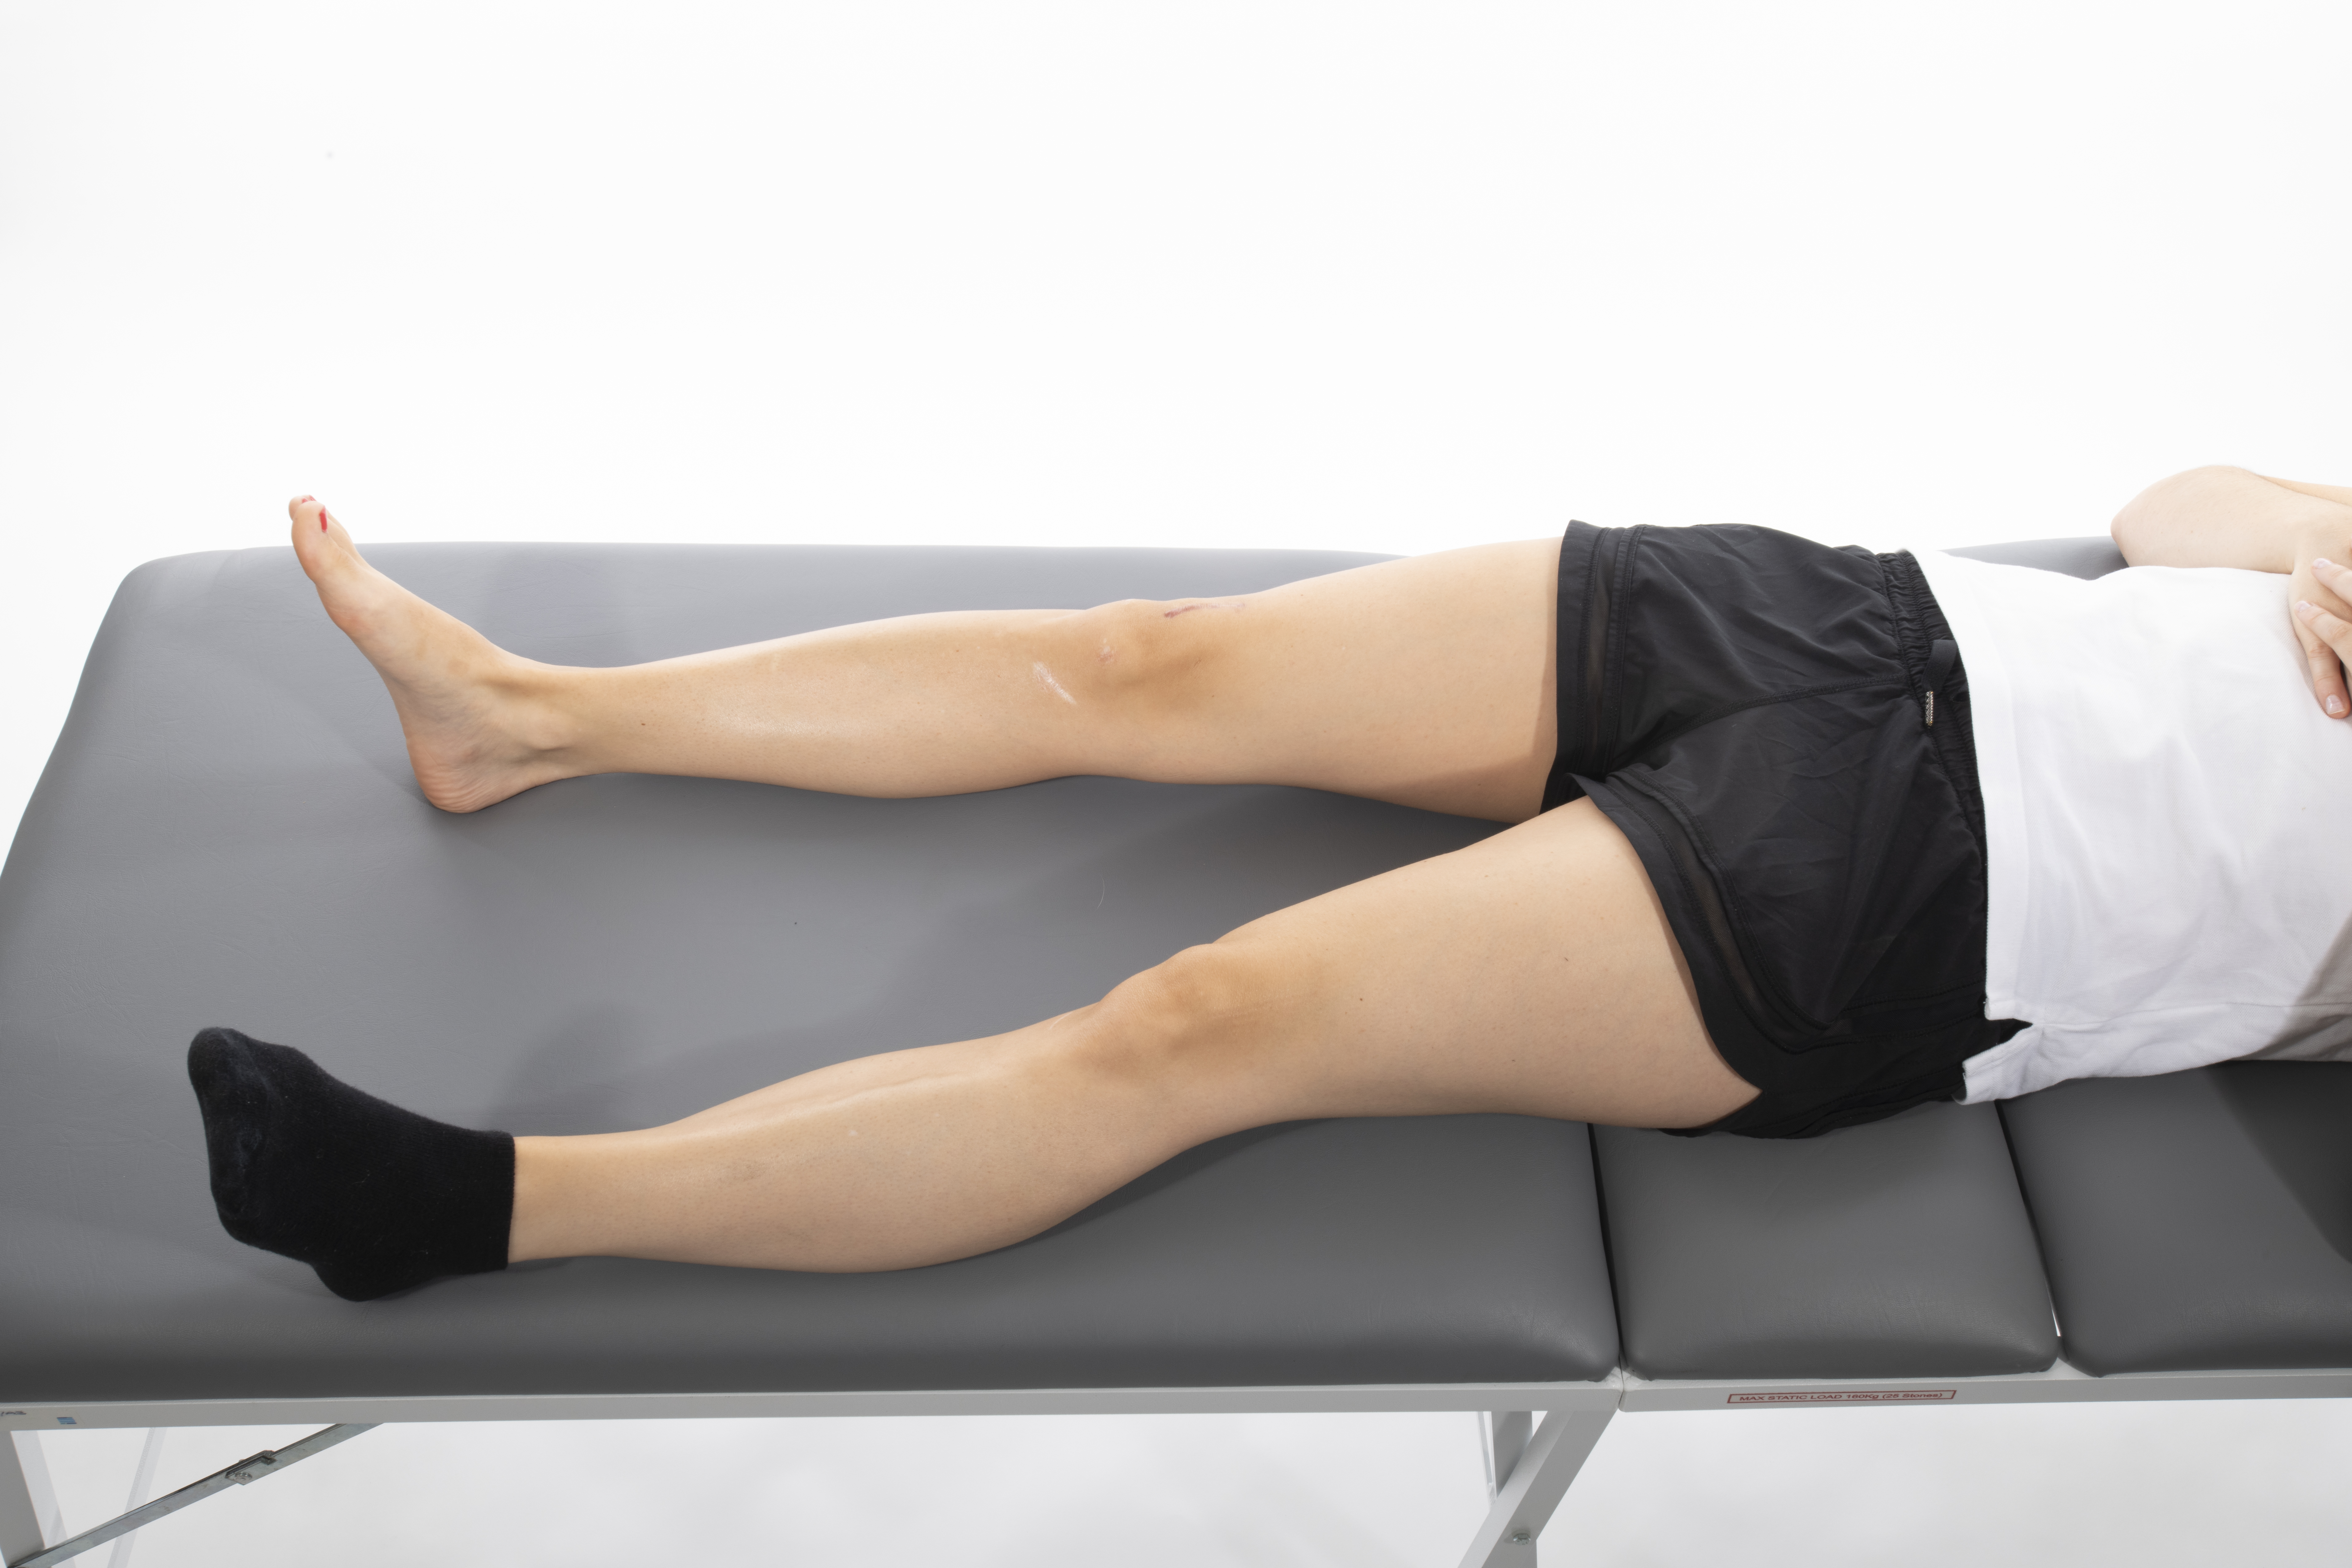 Lying hip abduction exercise; move your operated leg out to the side, keeping your knee straight and toes pointed to the ceiling